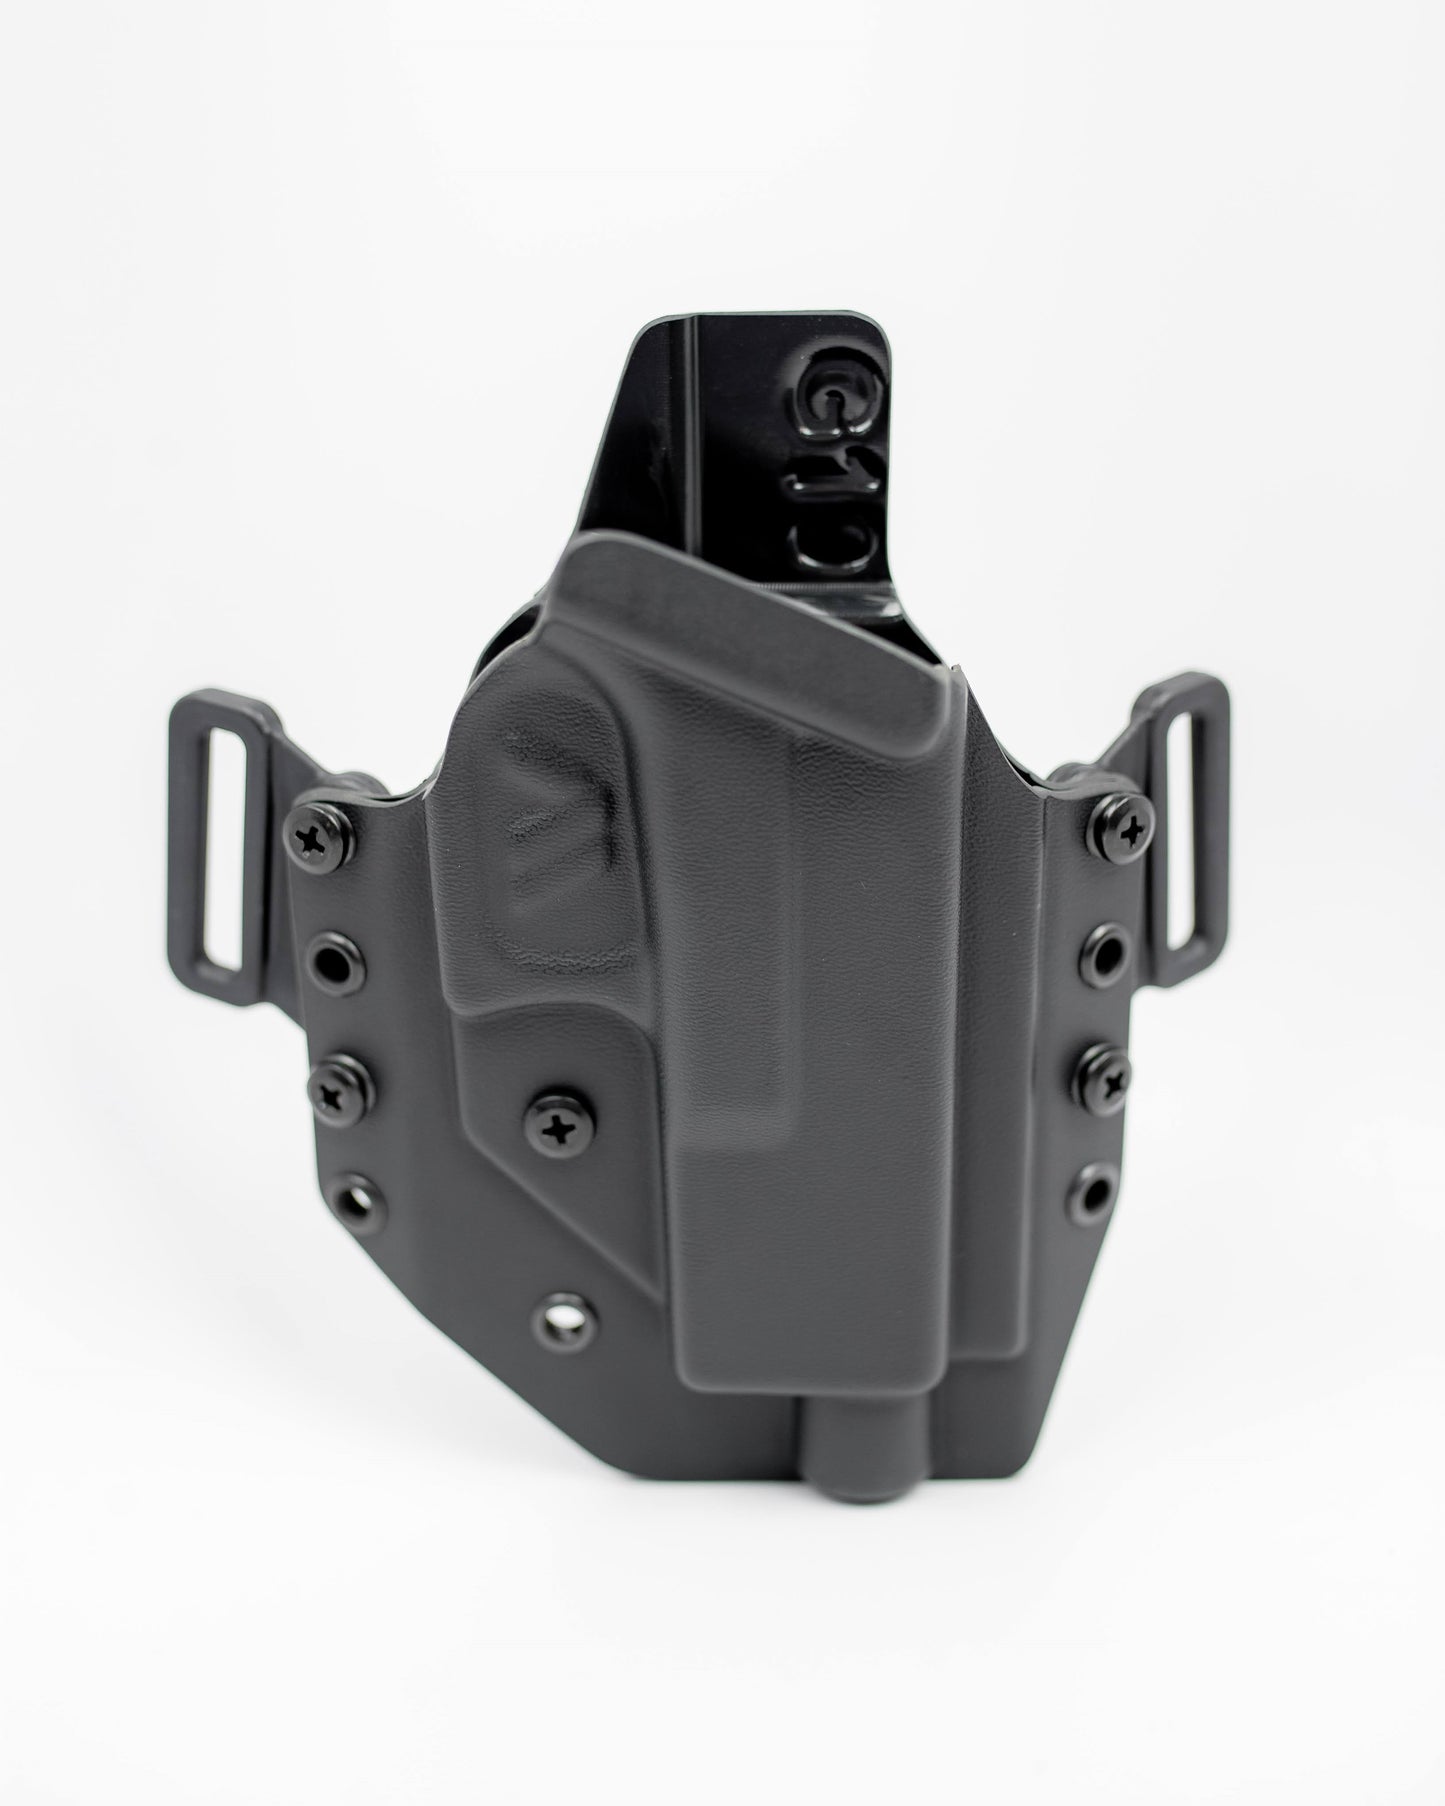 Glock 19 OWB Holster (19, 19X, 23, 32, 44, and 45)